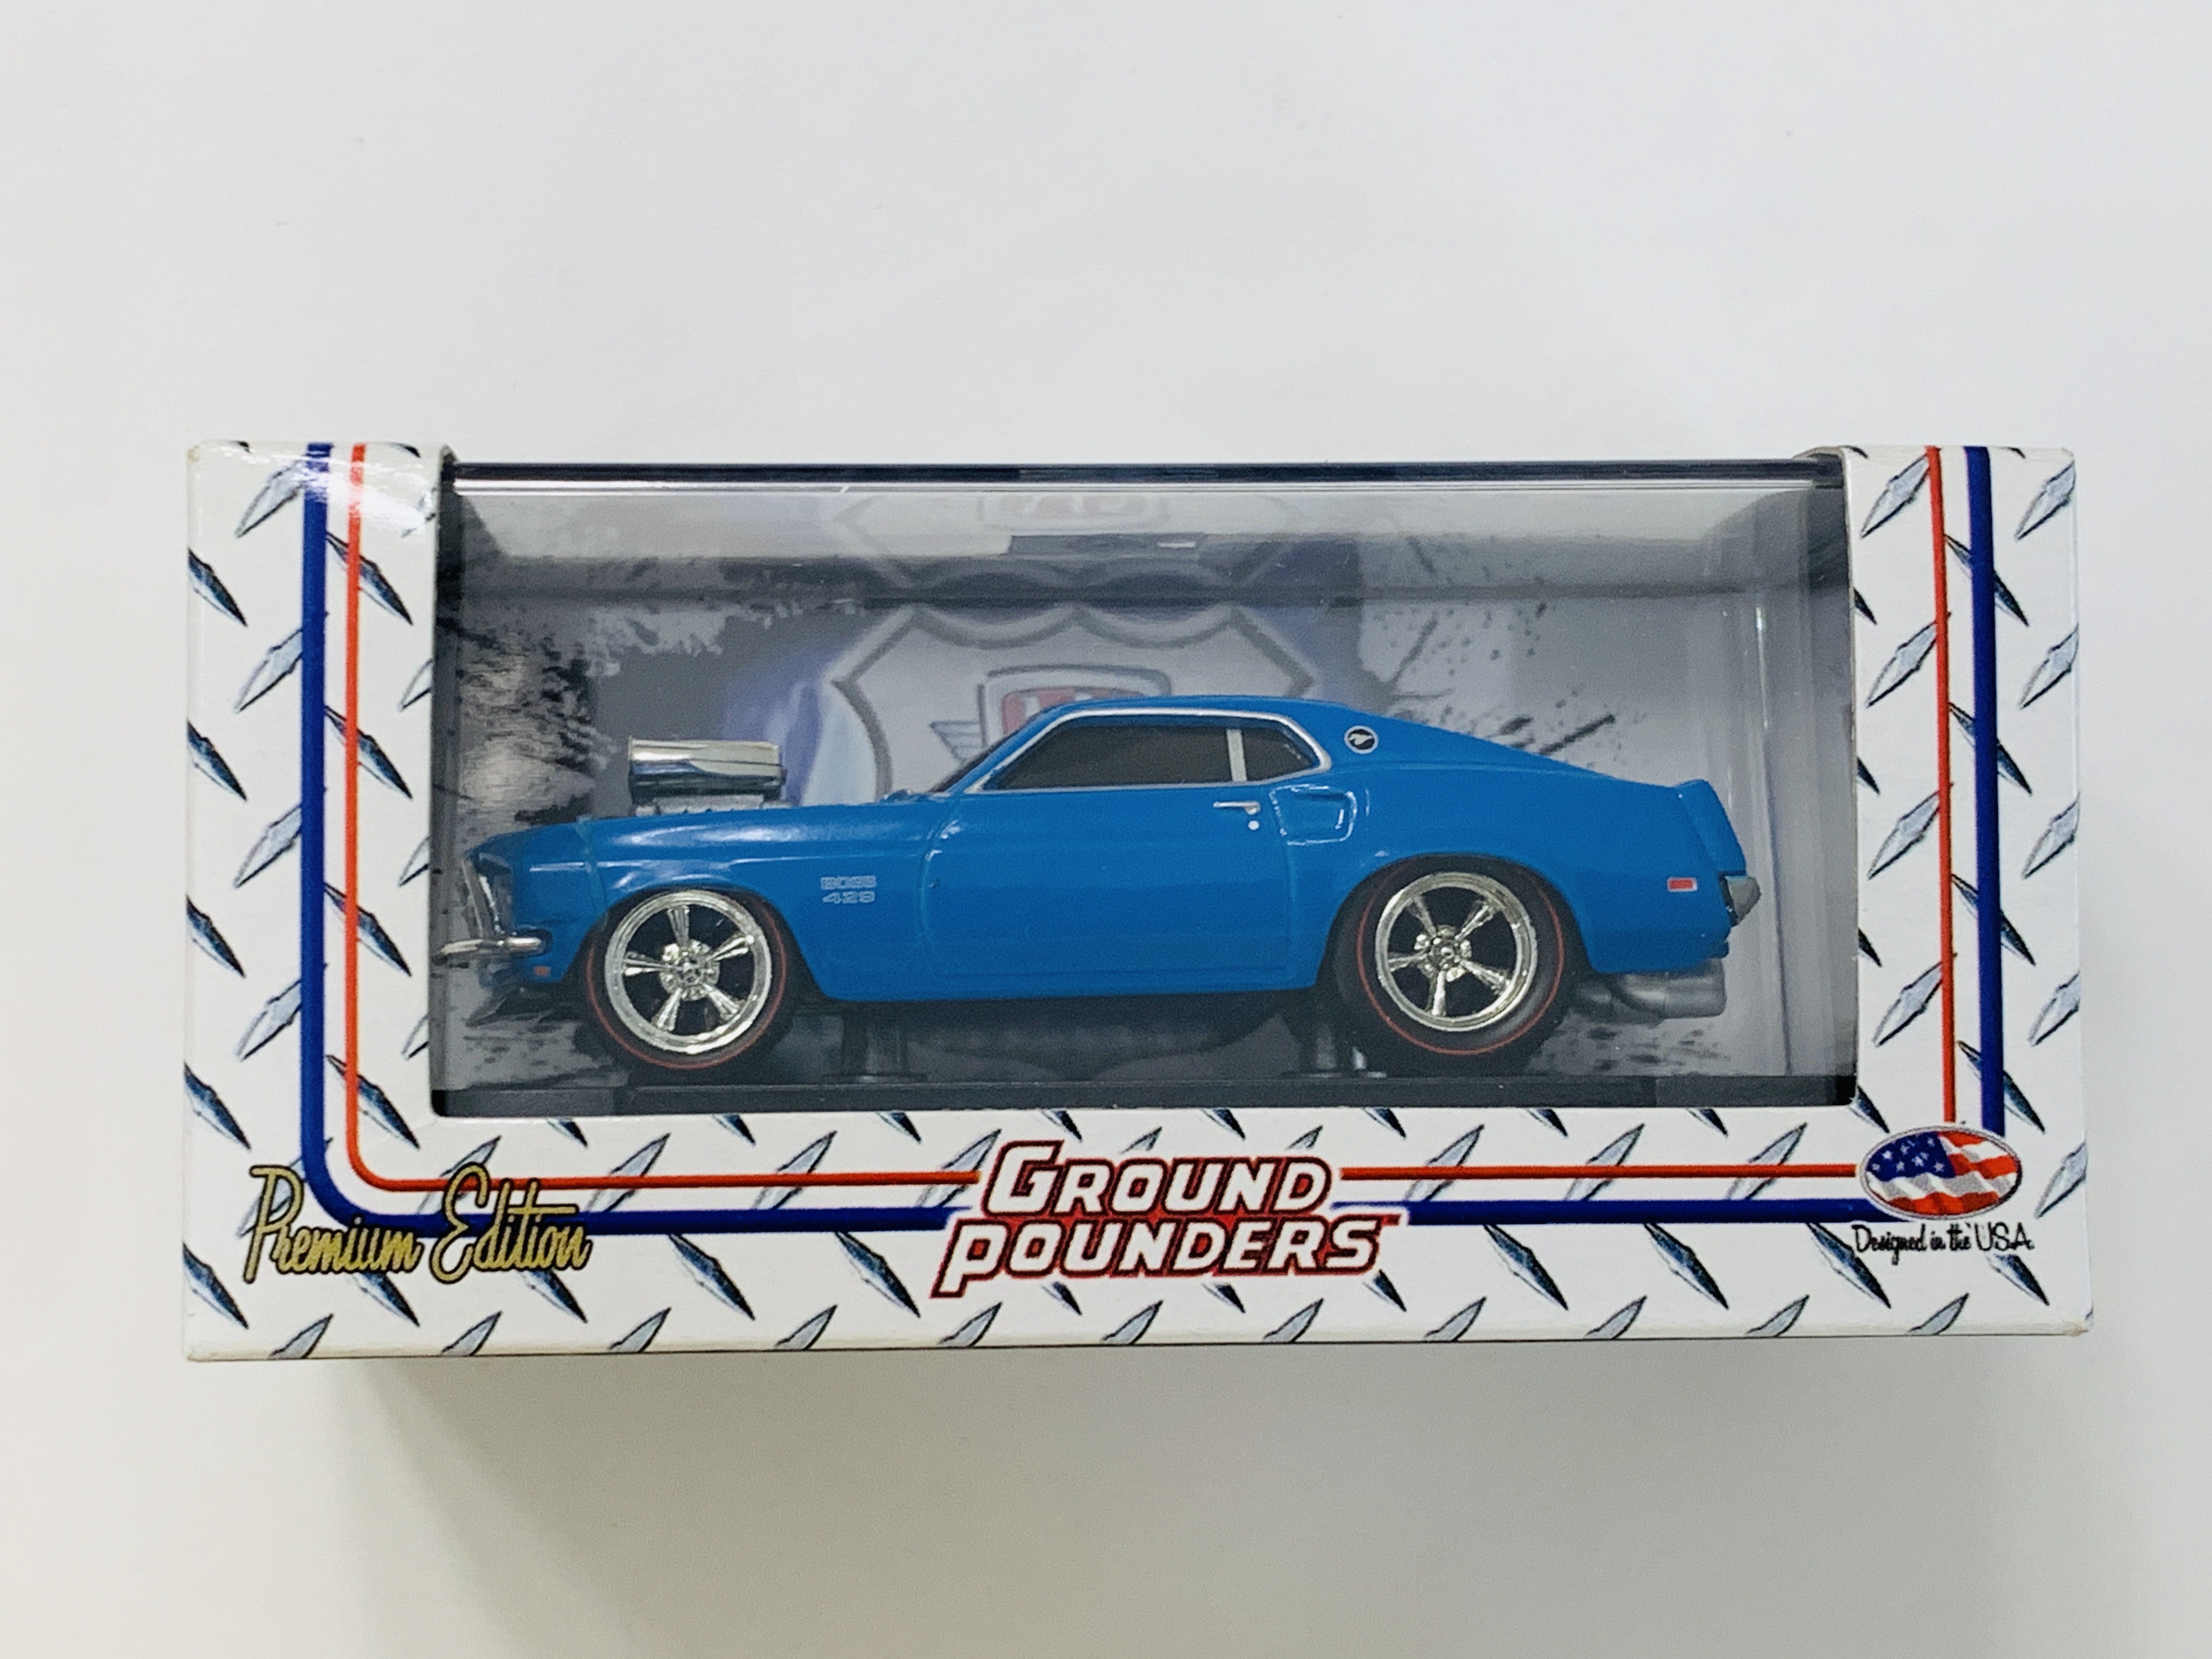 M2 Machines Ground-Pounders 1969 Ford Mustang Boss 429 10-02